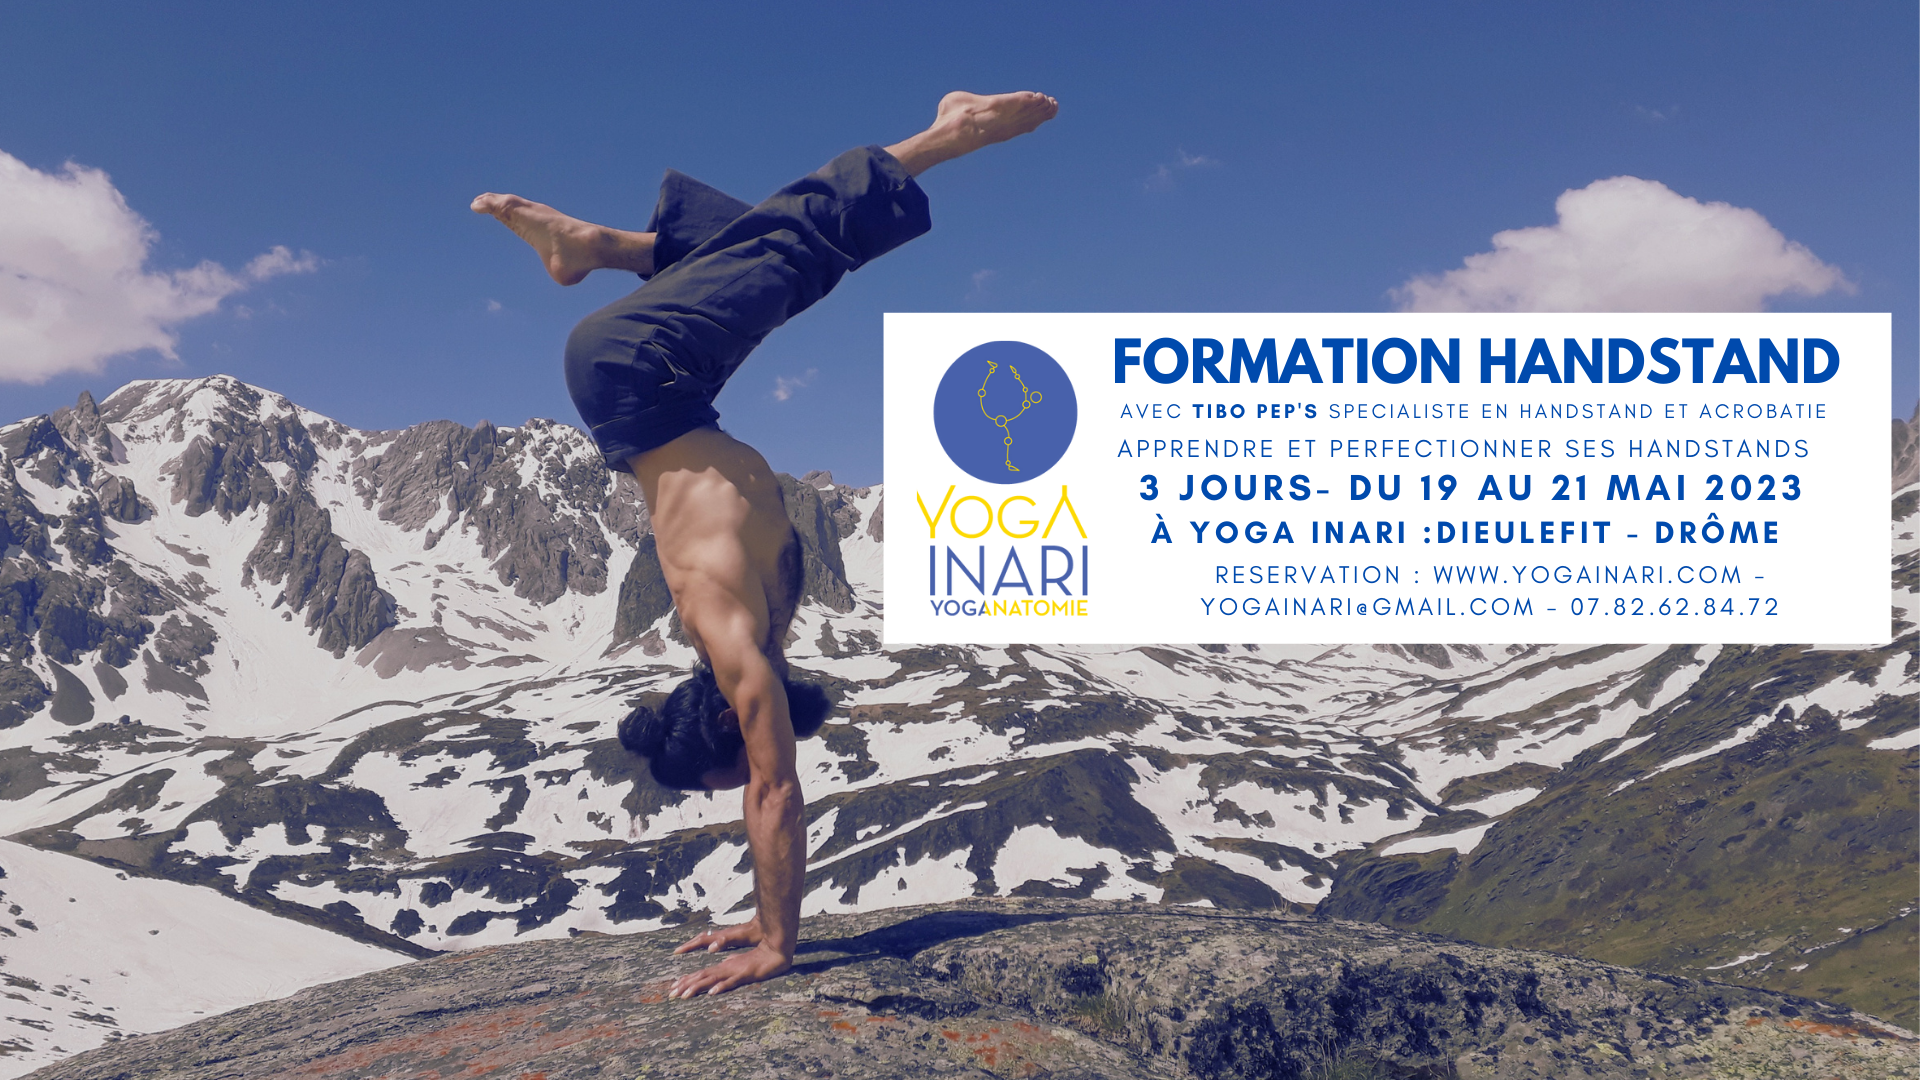 Formation HANDSTAND avec Tibo Pep's